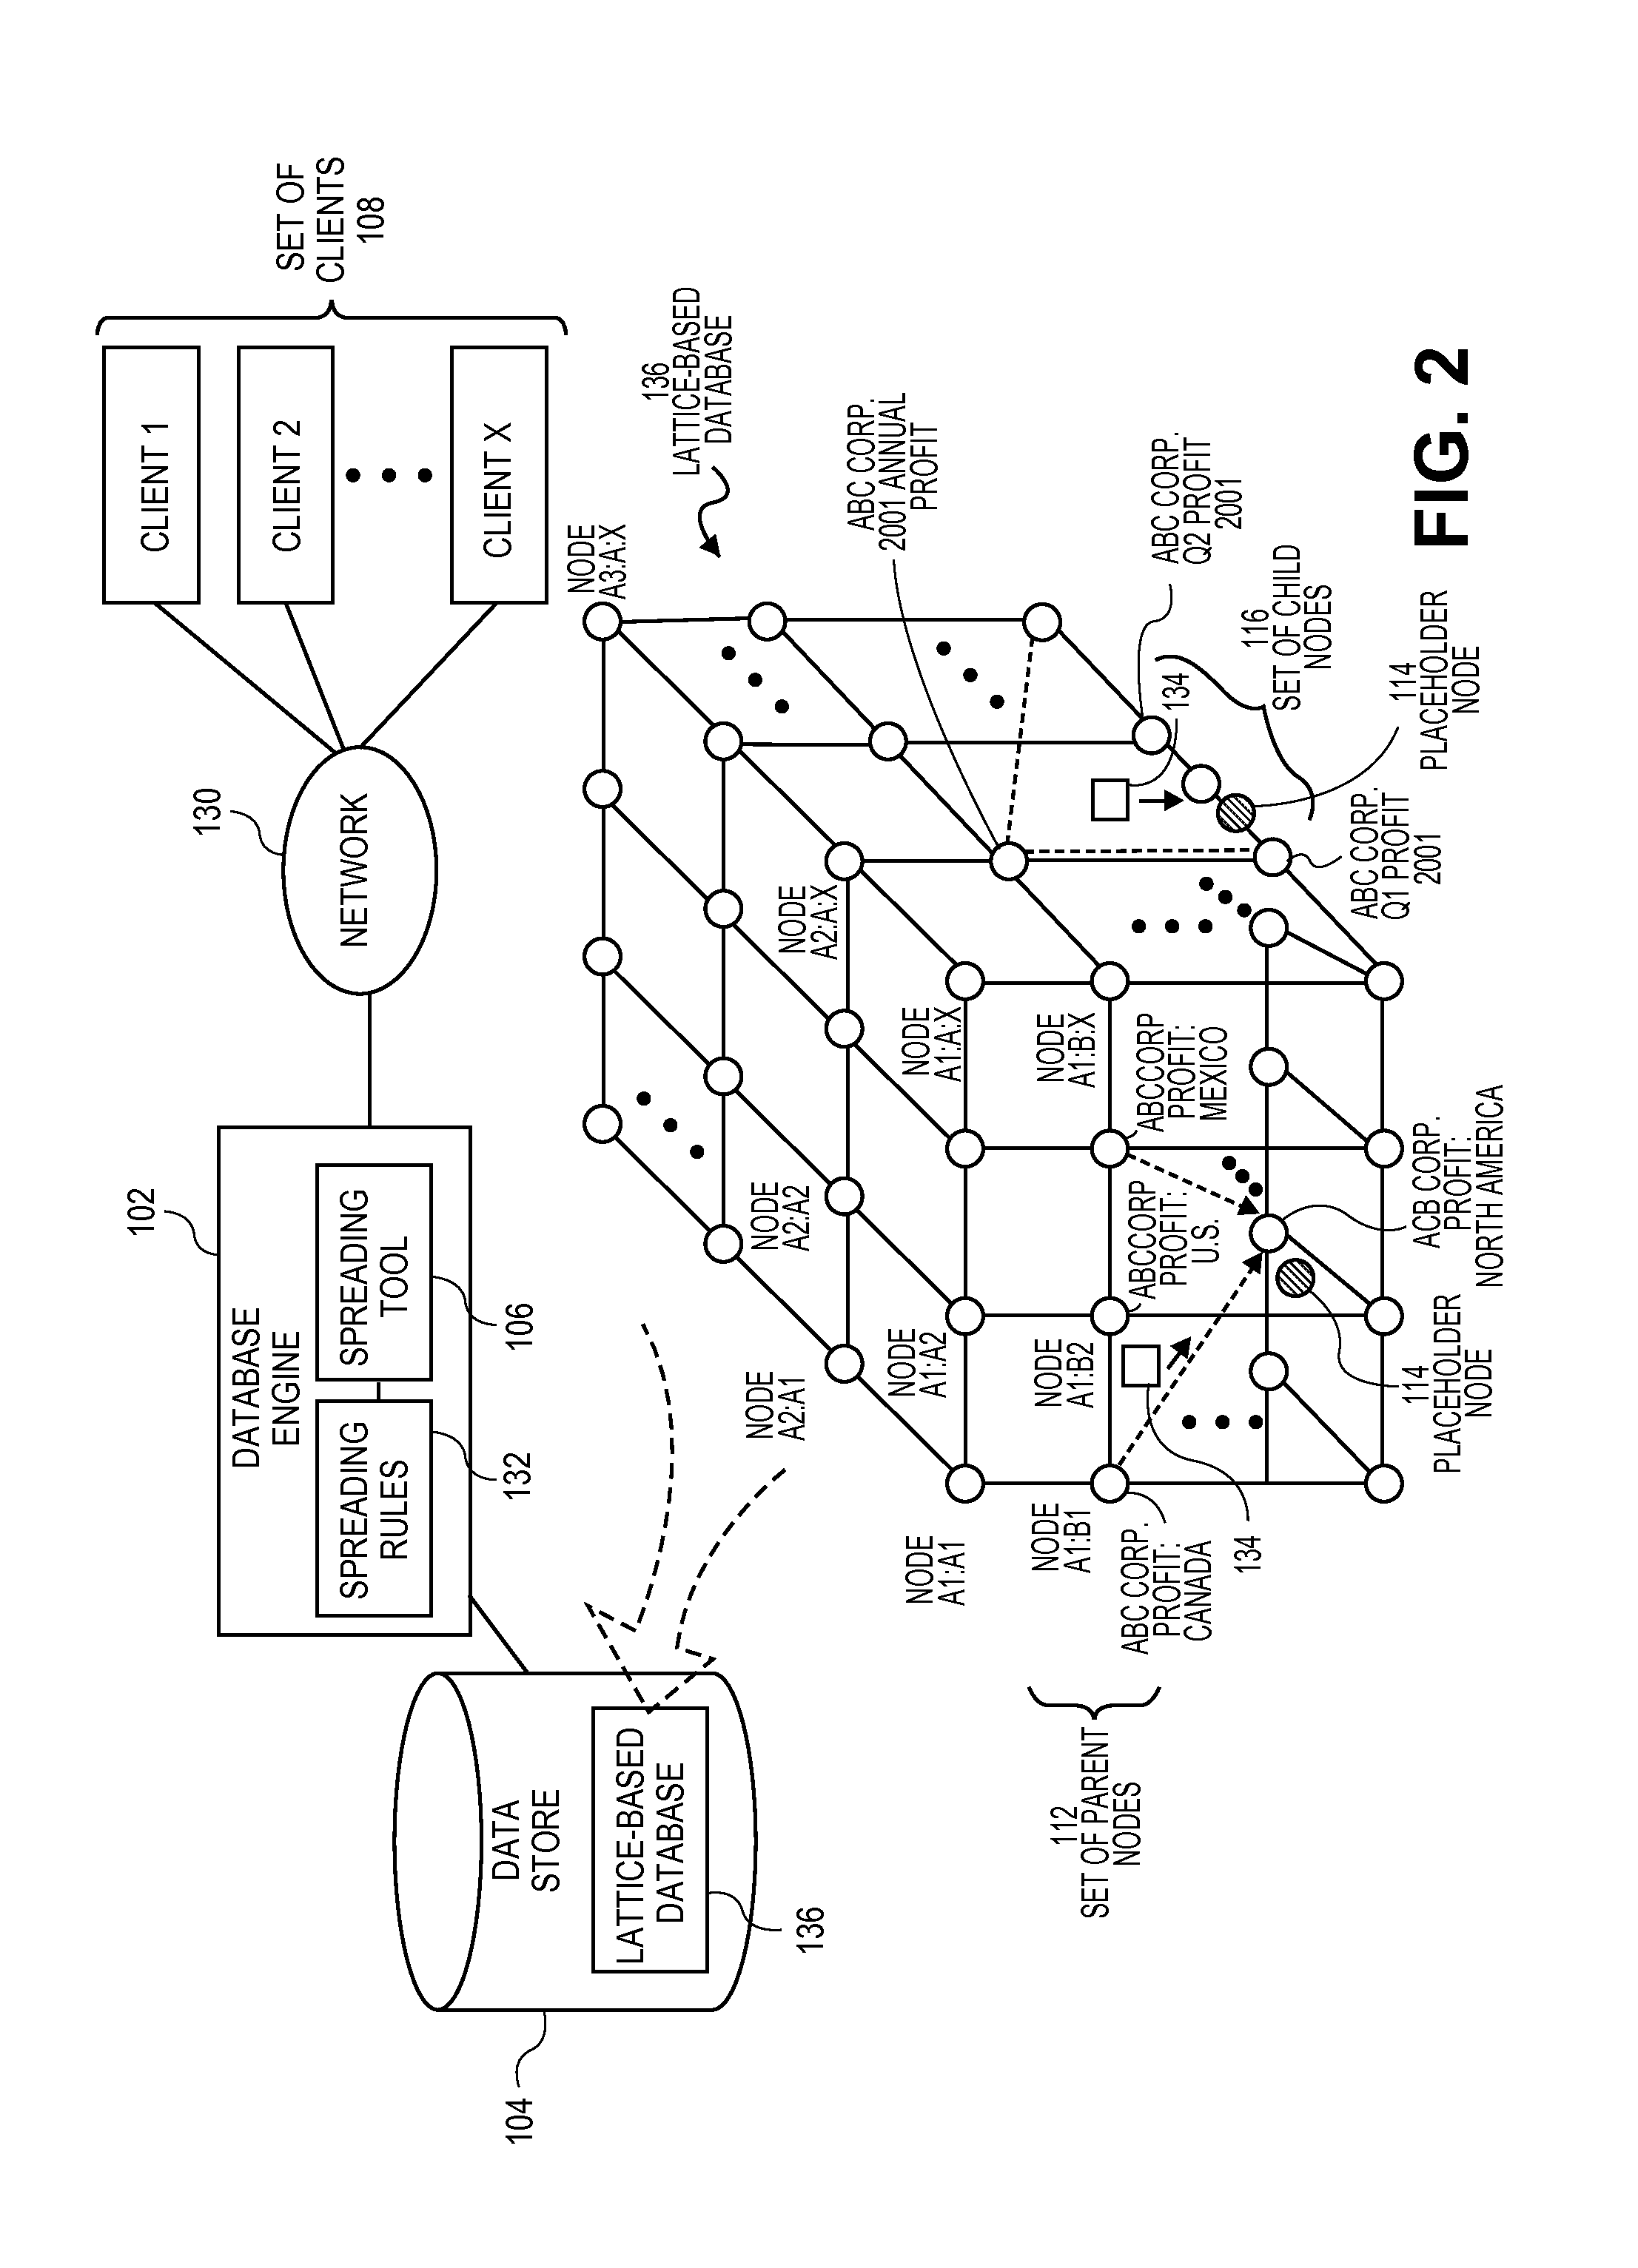 Systems and methods for conditioned distribution of data in a lattice-based database using spreading rules